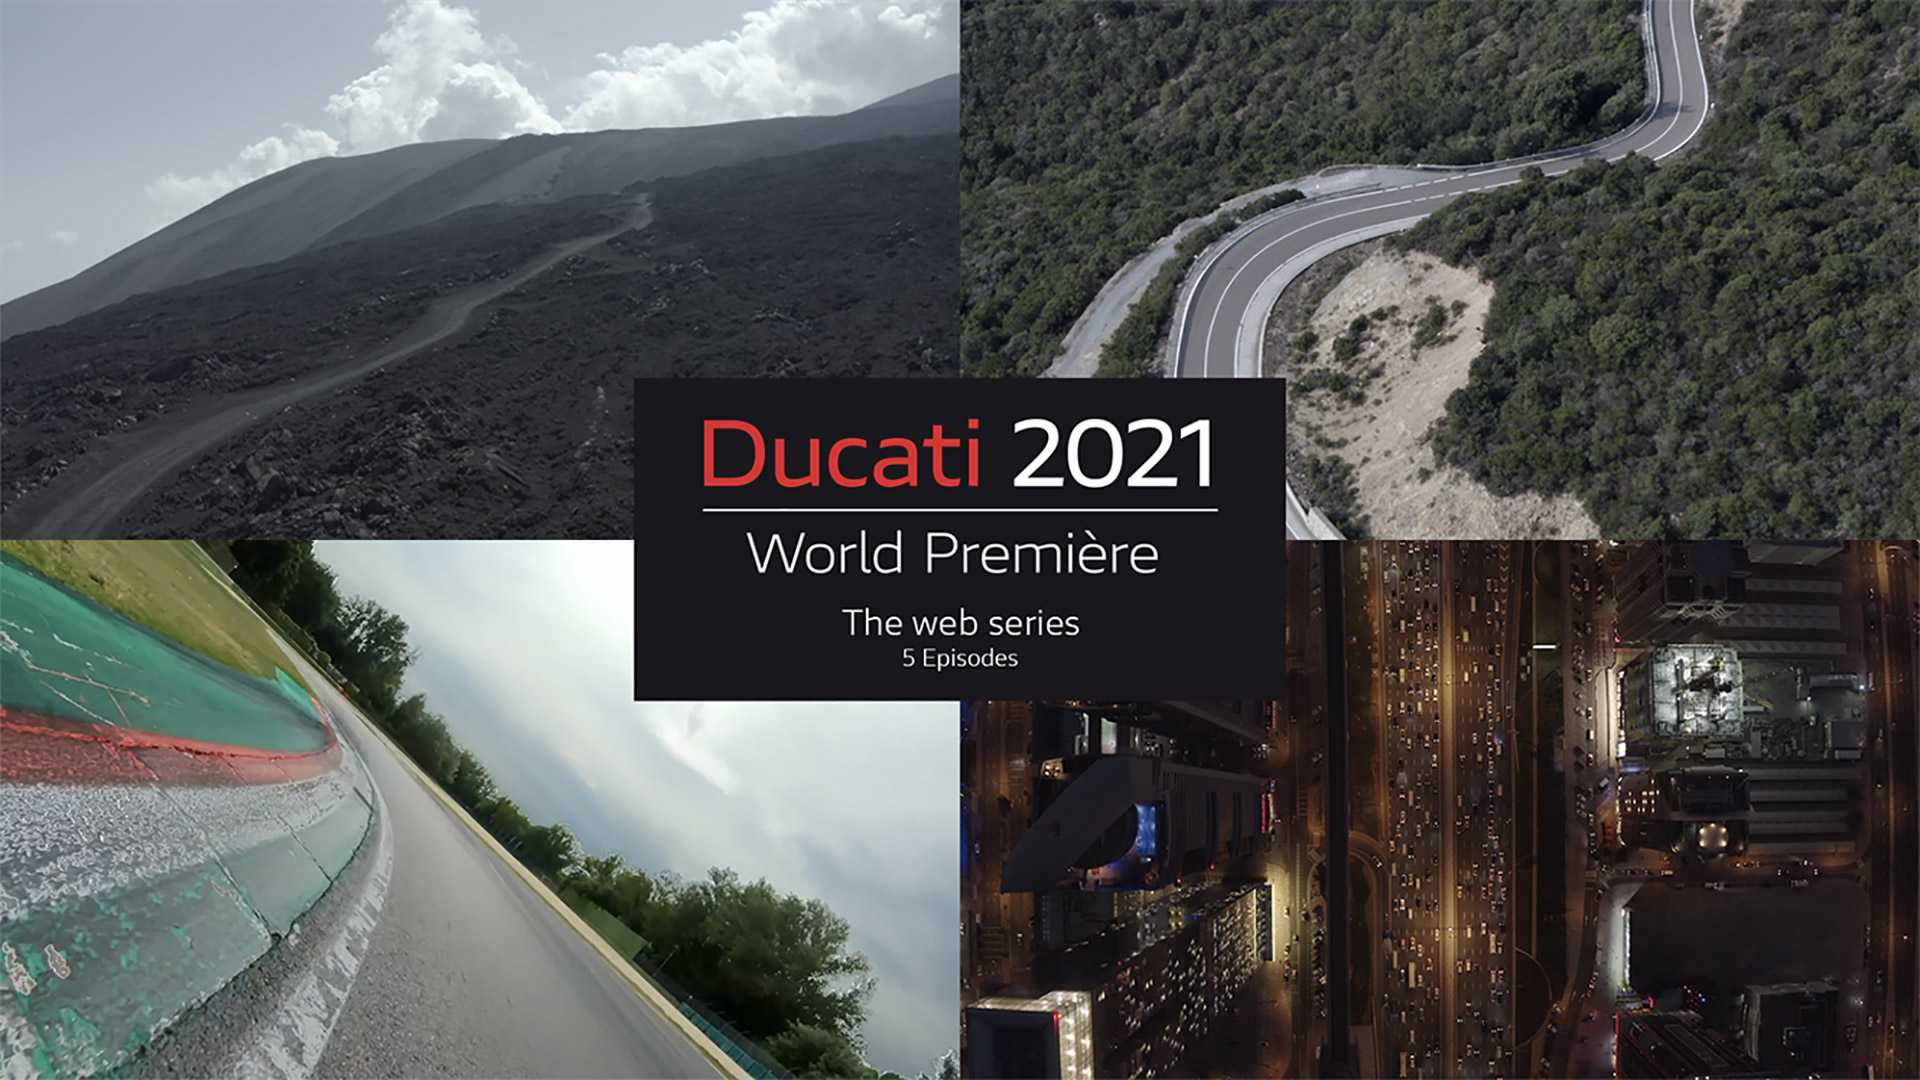 Ducati new introductions come via web series
- also in the App MOTORCYCLE NEWS